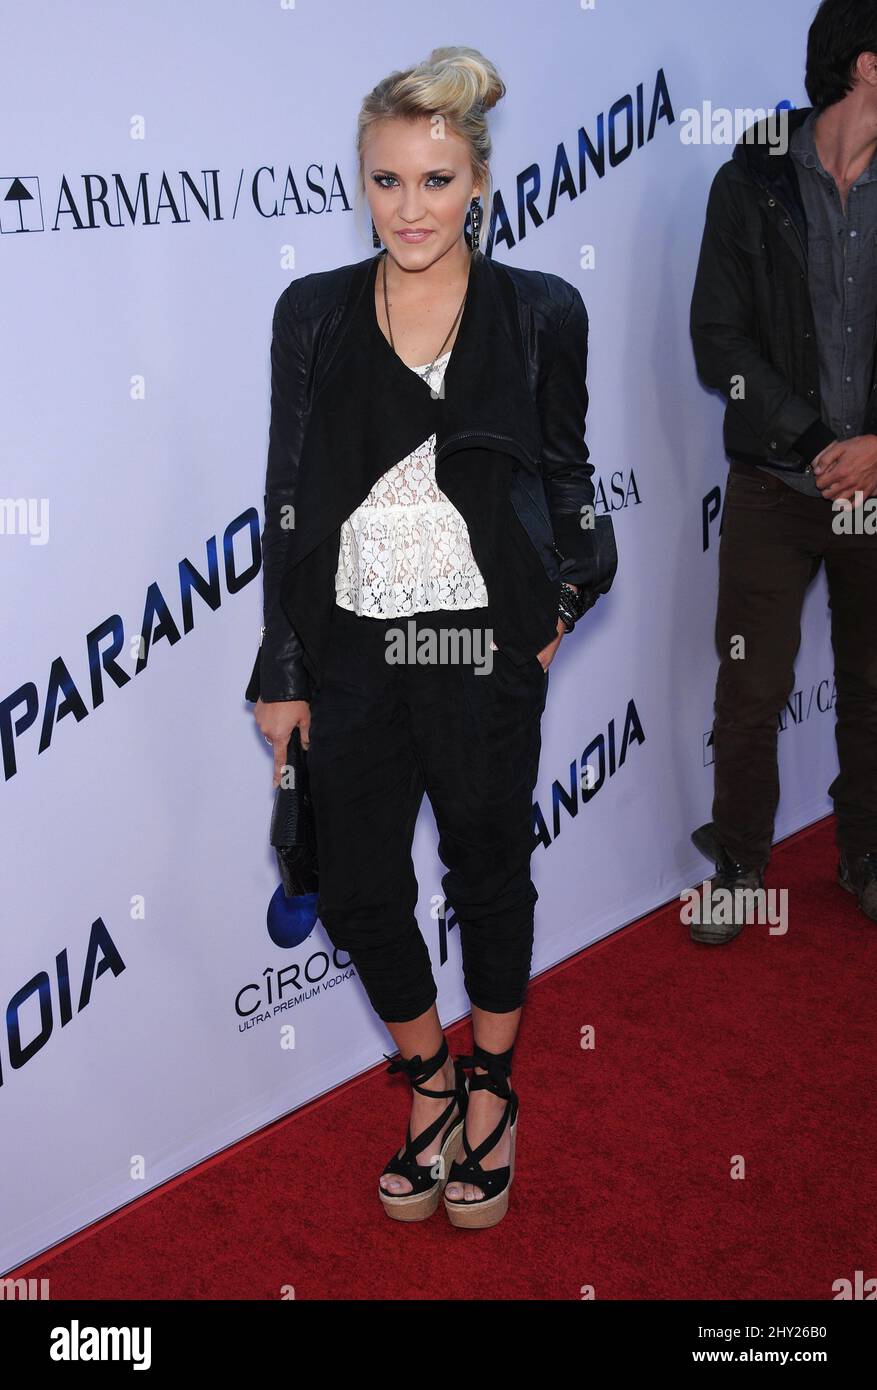 Emily Osment attends the 'Paranoia' US premiere held at the Directors Guild of America, Los Angeles. Stock Photo